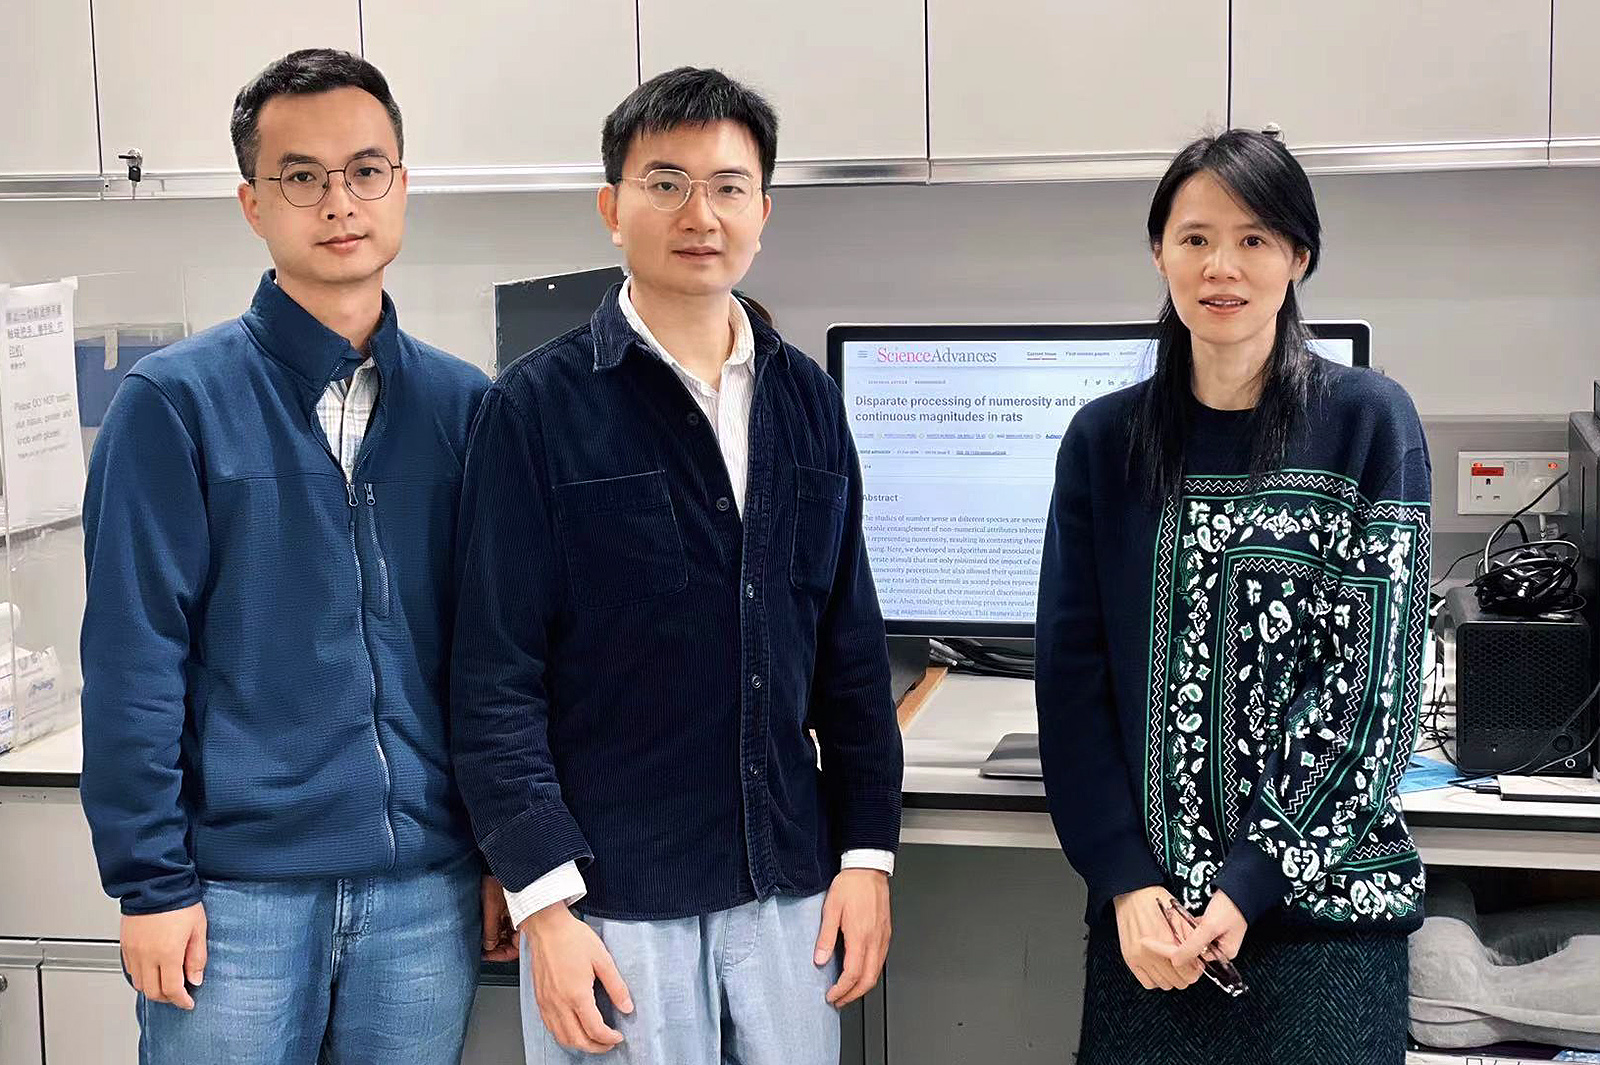 Research team members from CUHK include (from left) Mr Rong Kanglin, Dr Liang Tuo, and Professor Ke Ya.